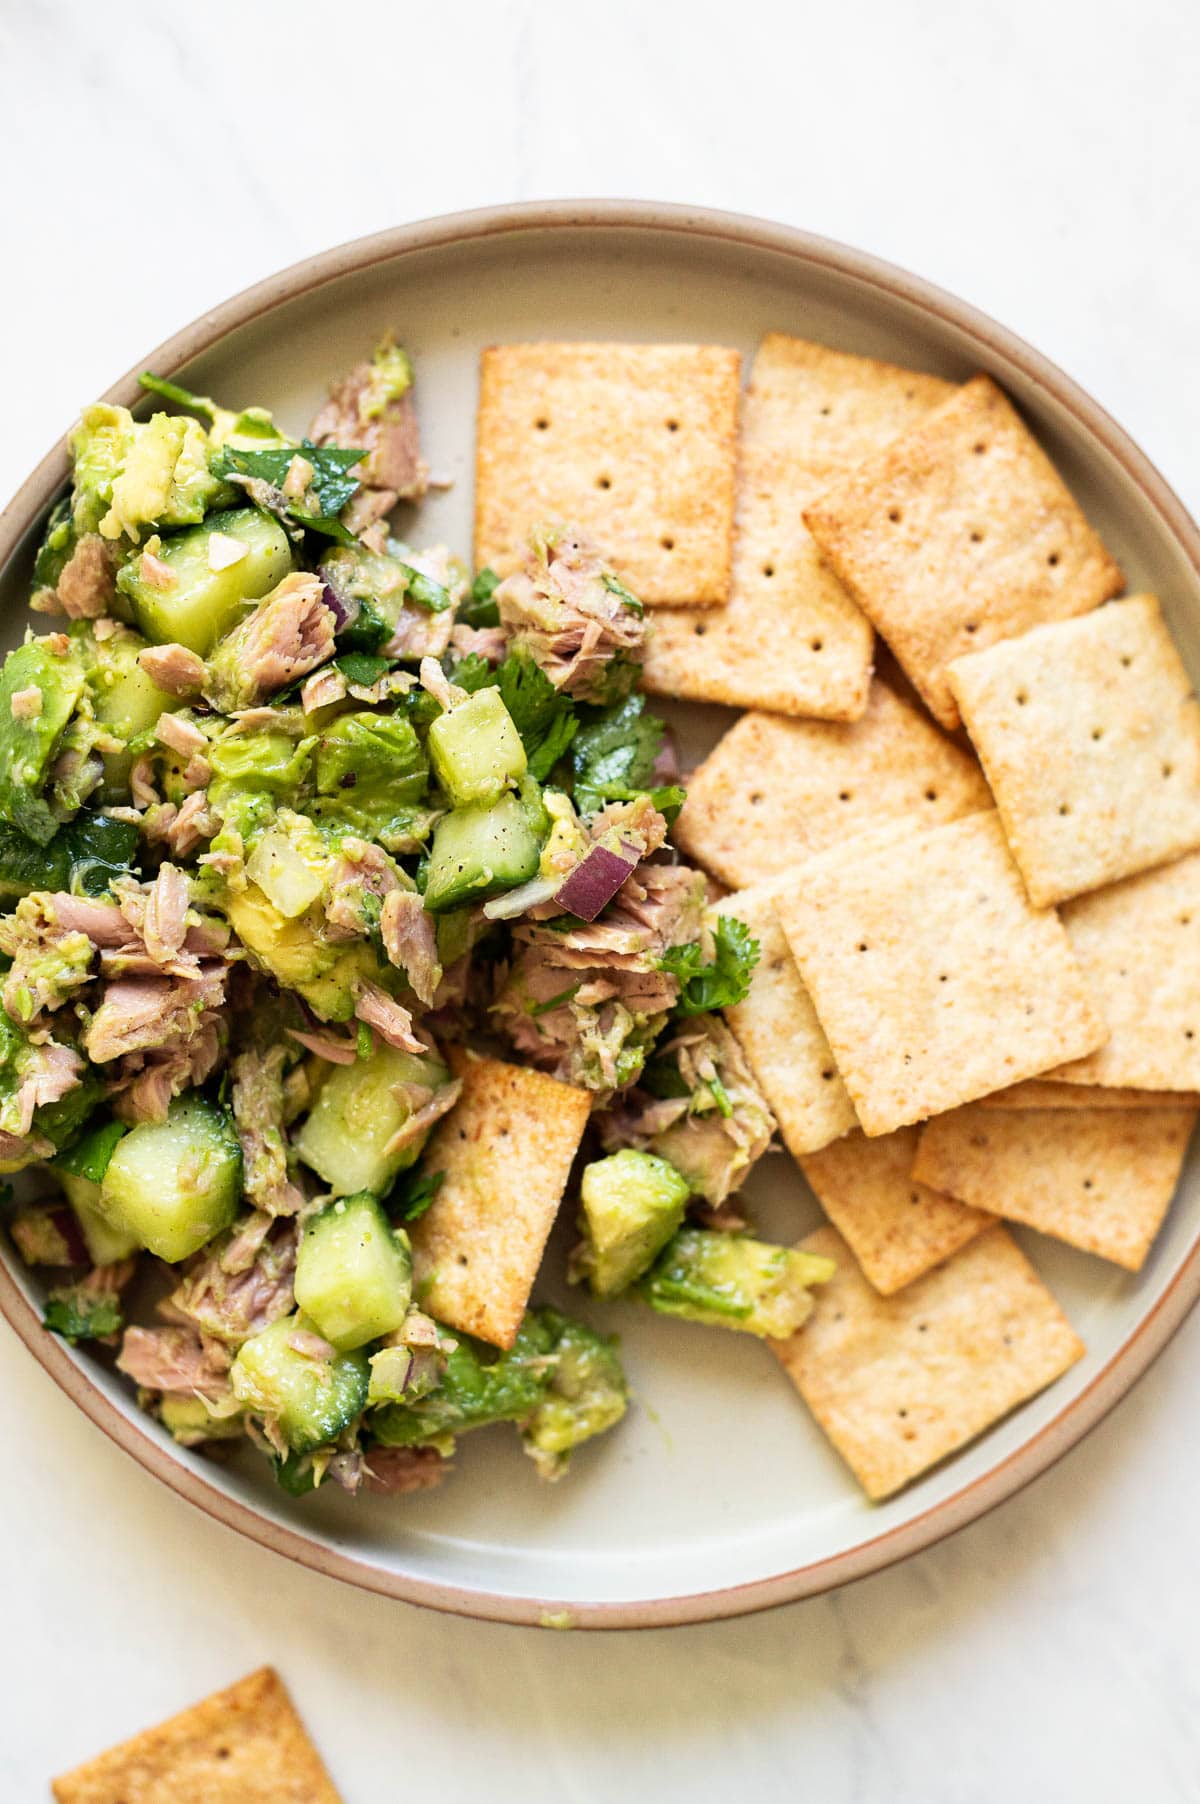 Tuna avocado salad served with almond flour crackers on a plate.